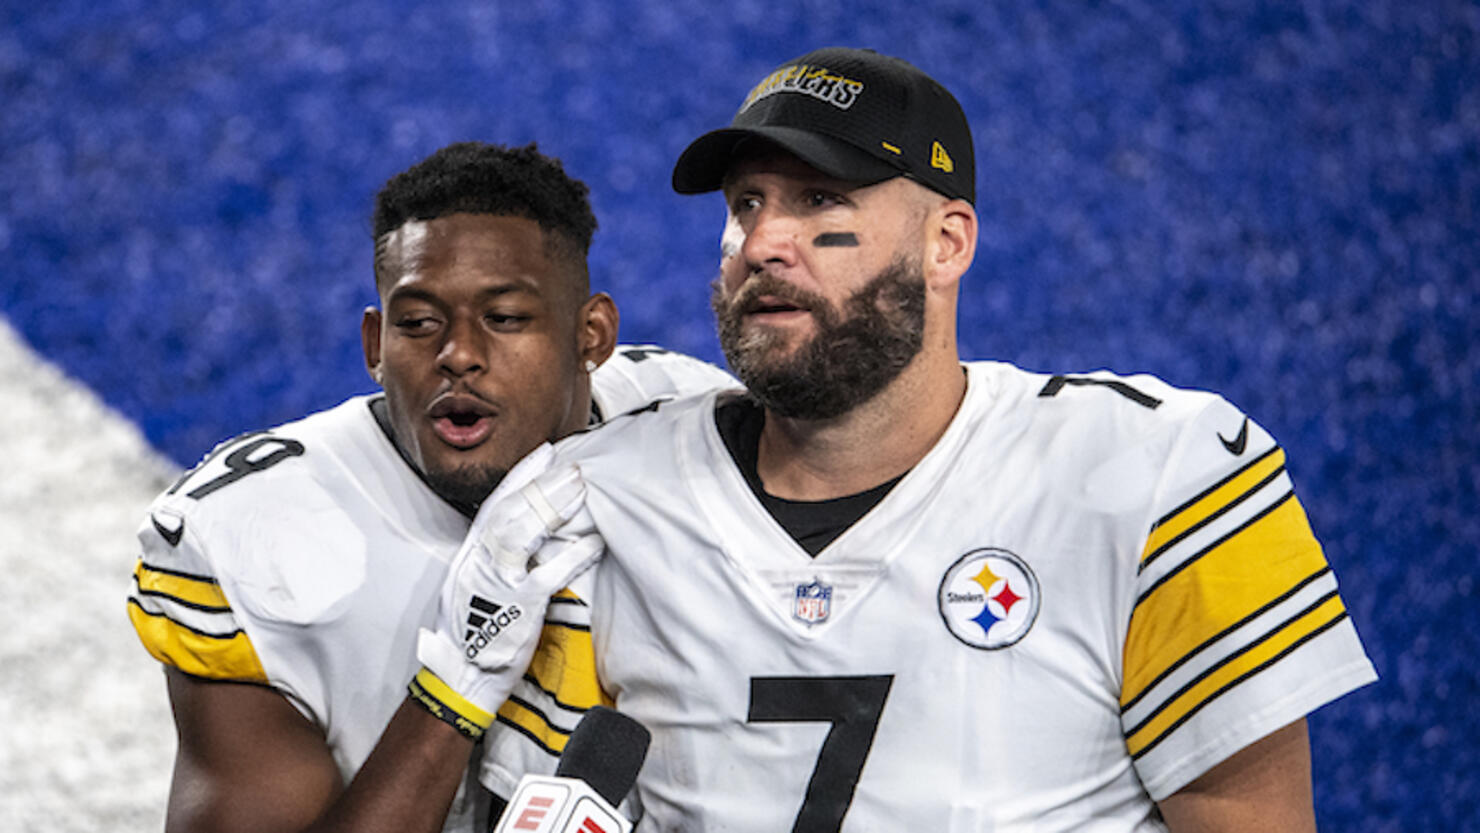 Steelers Now Hold A New Record After Change To 17-Game Season